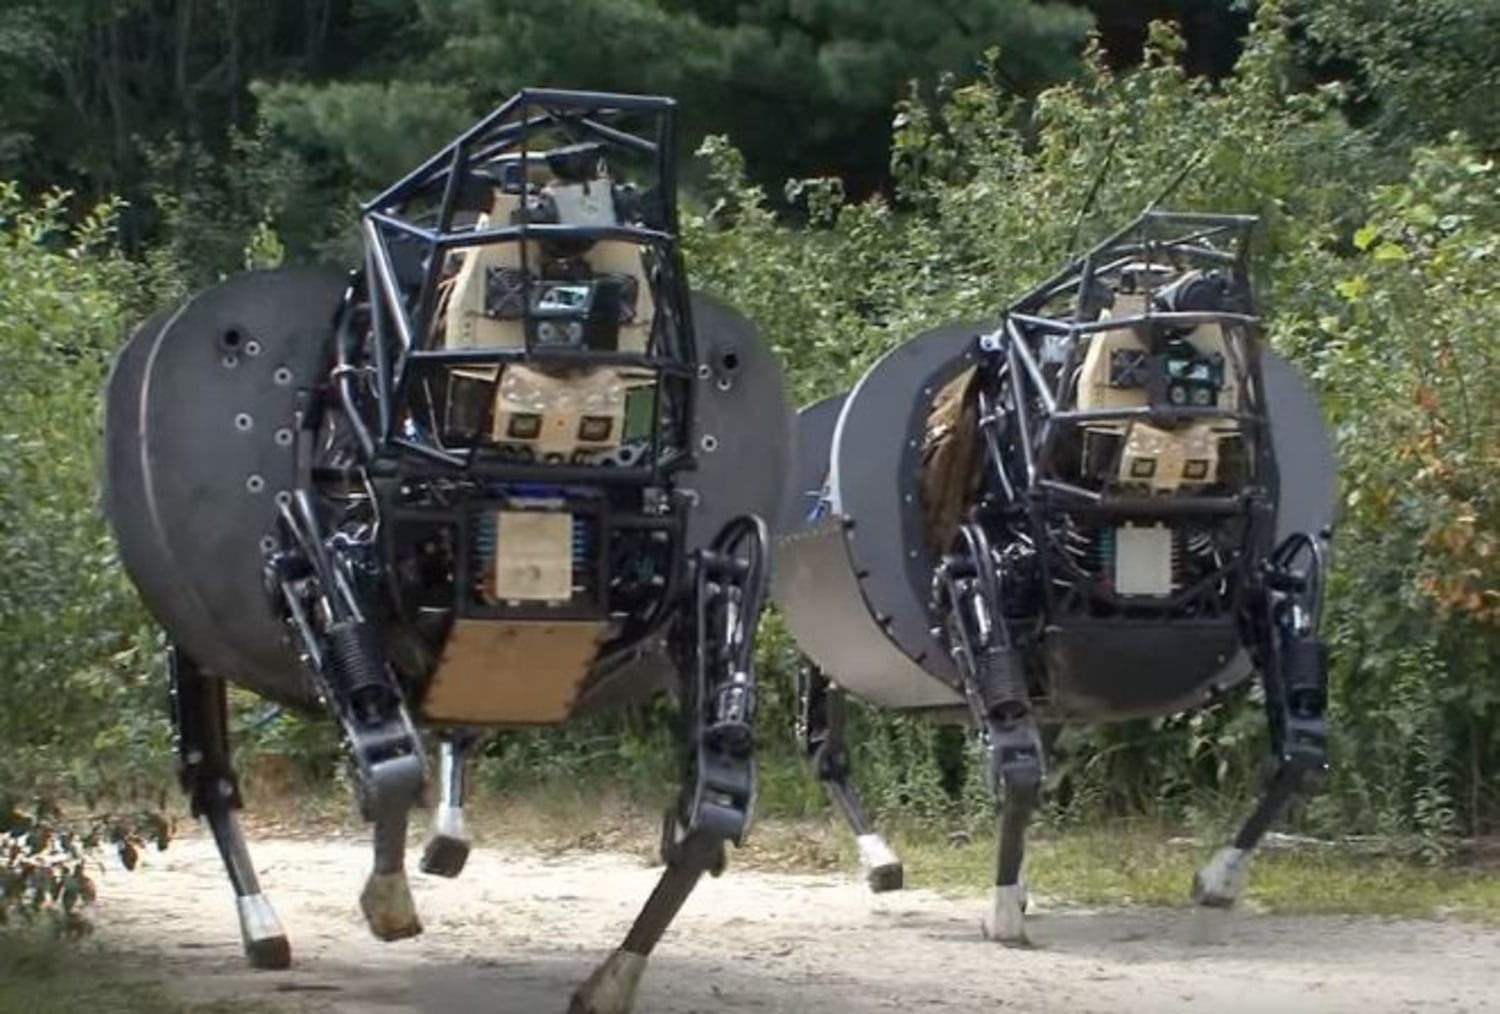 Lean, Mean Fighting Machine': Army to Get Robotic Mules, Jetpack Suits,  Tethered Drone Systems, Jammers - News18